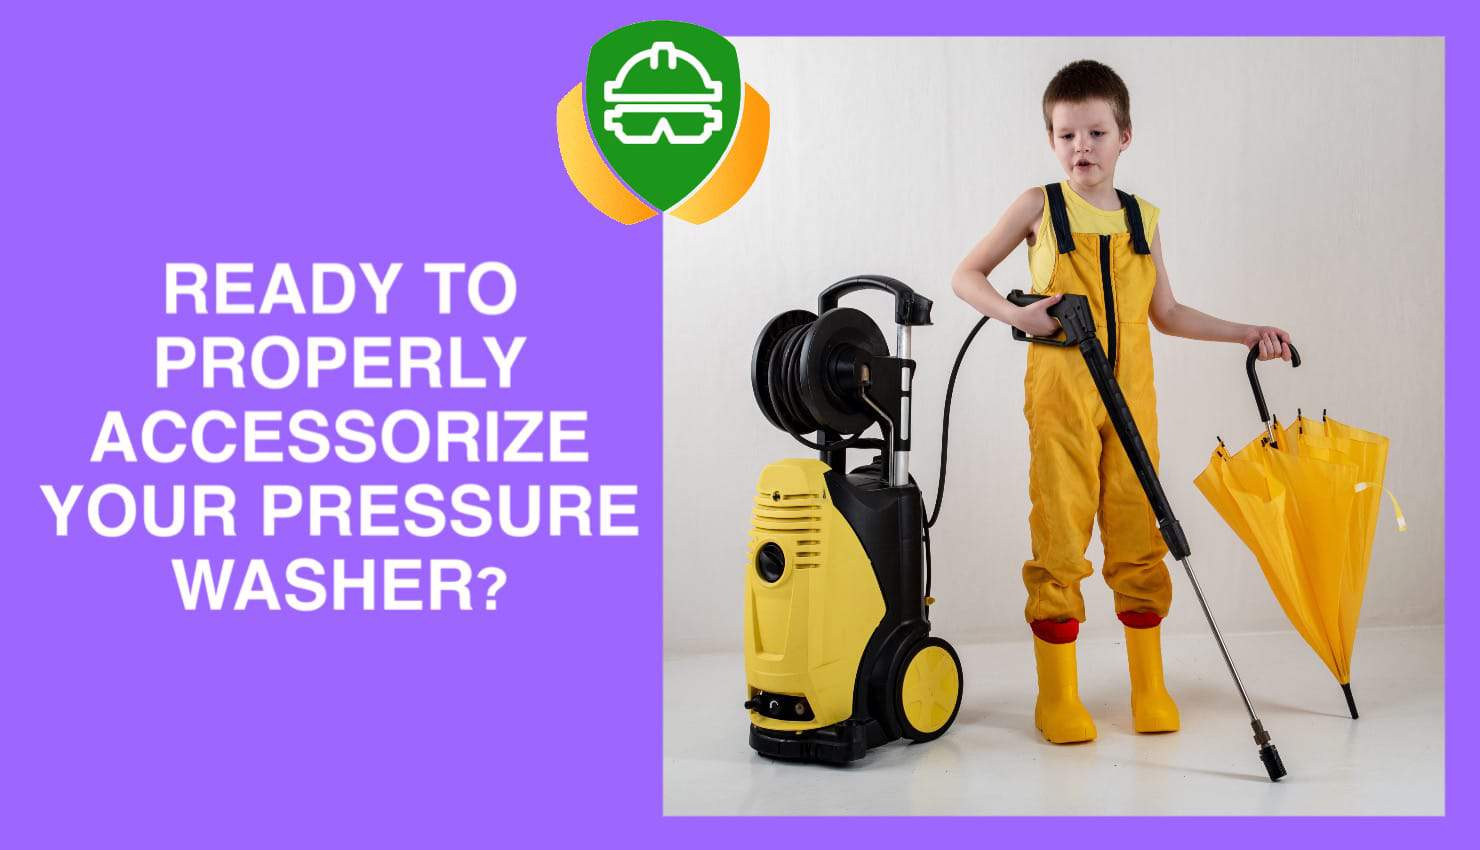 Accessories for your Pressure washer